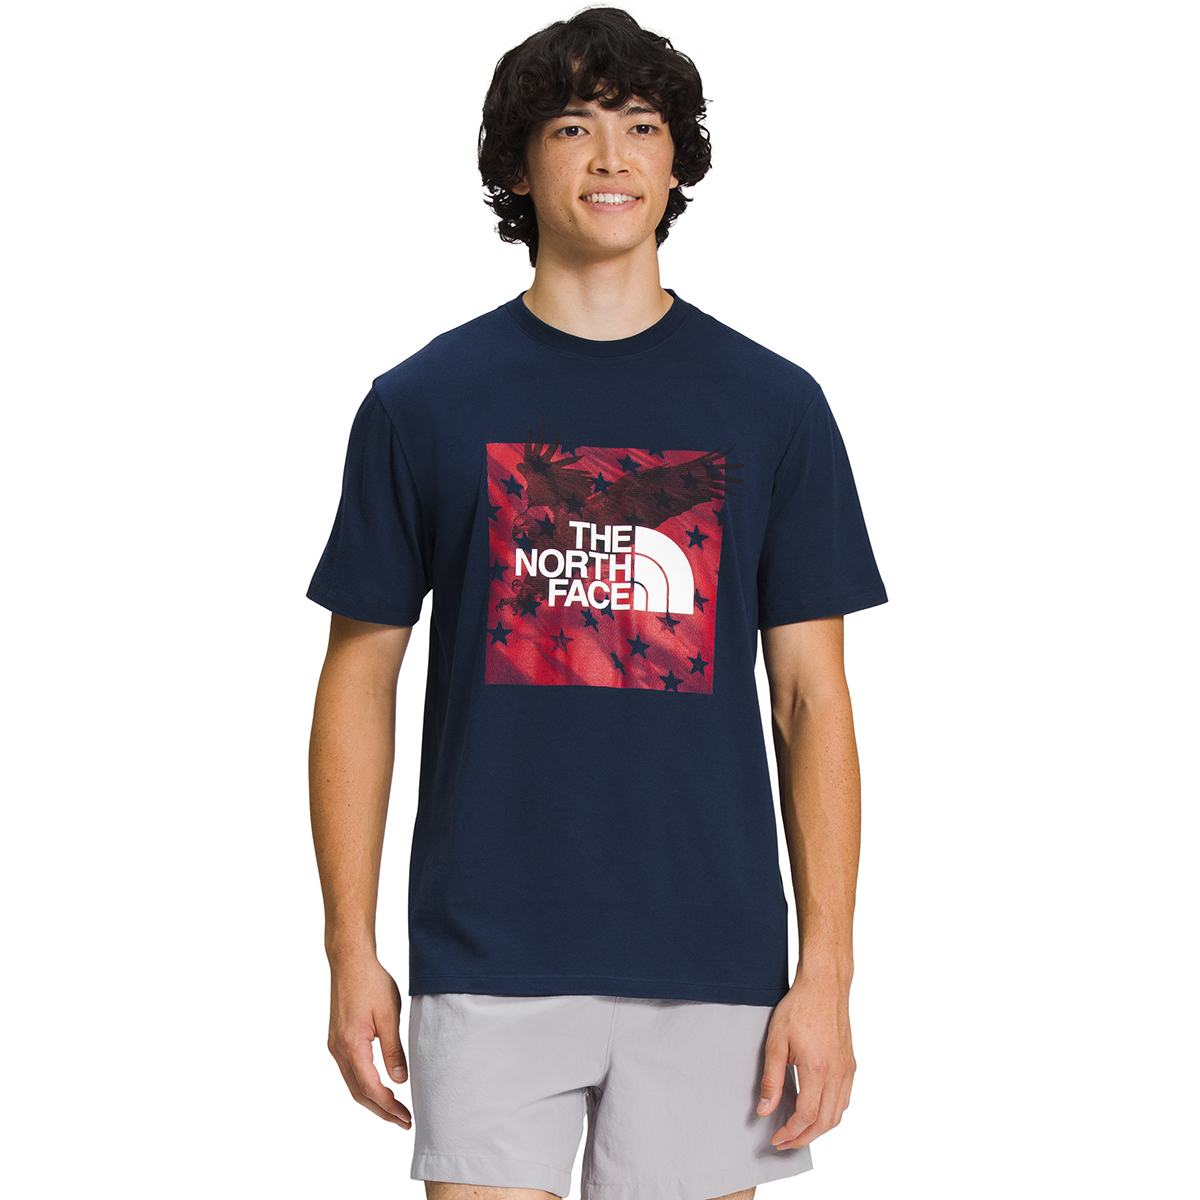 The North Face Men's Americana Short-Sleeve Graphic Tee - Size 2XL